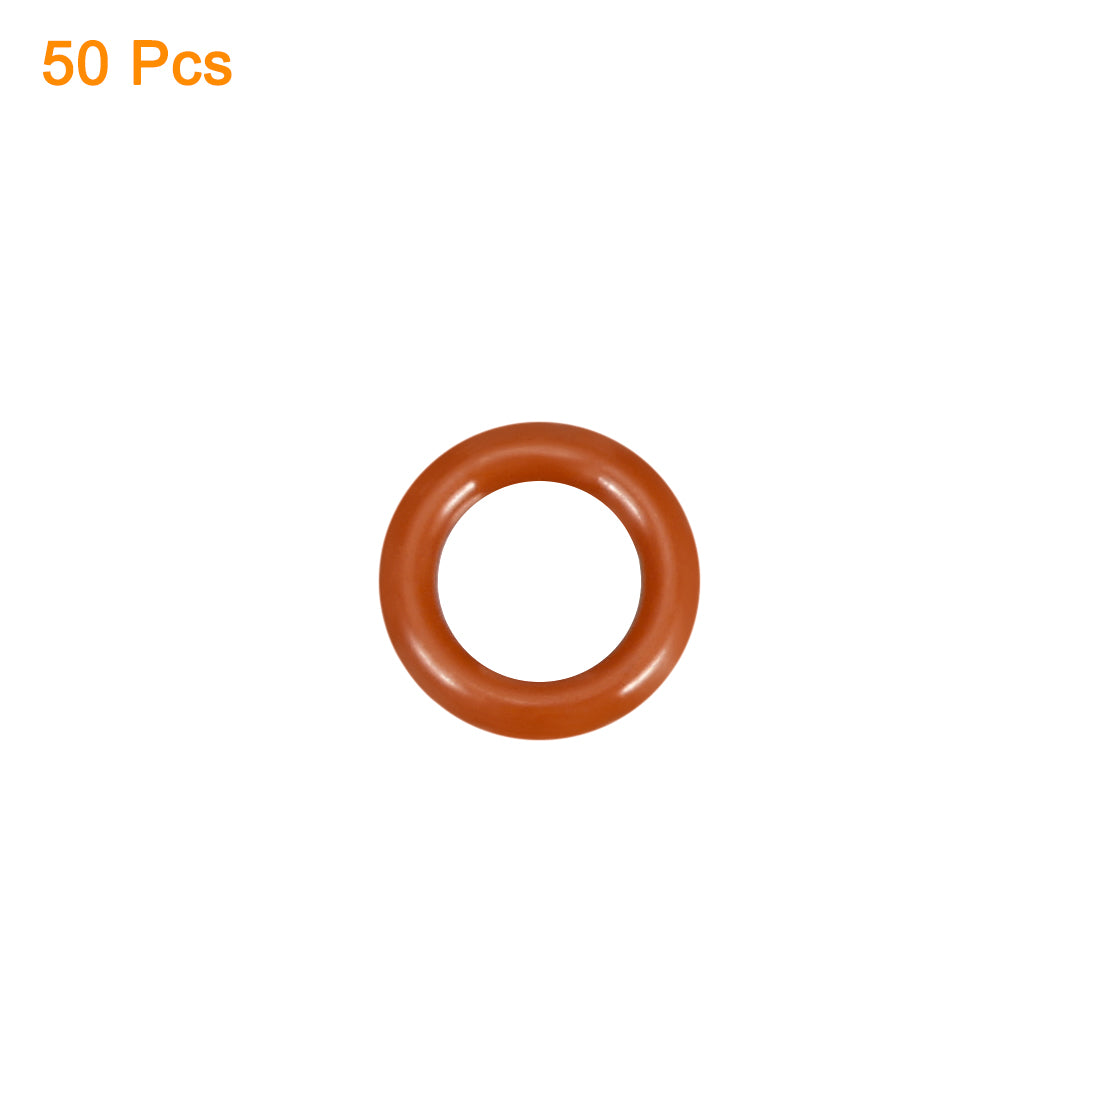 uxcell Uxcell Silicone O-Ring 11mmx7mmx2mm VMQ Seal Rings Sealing Gasket Red 50PCS